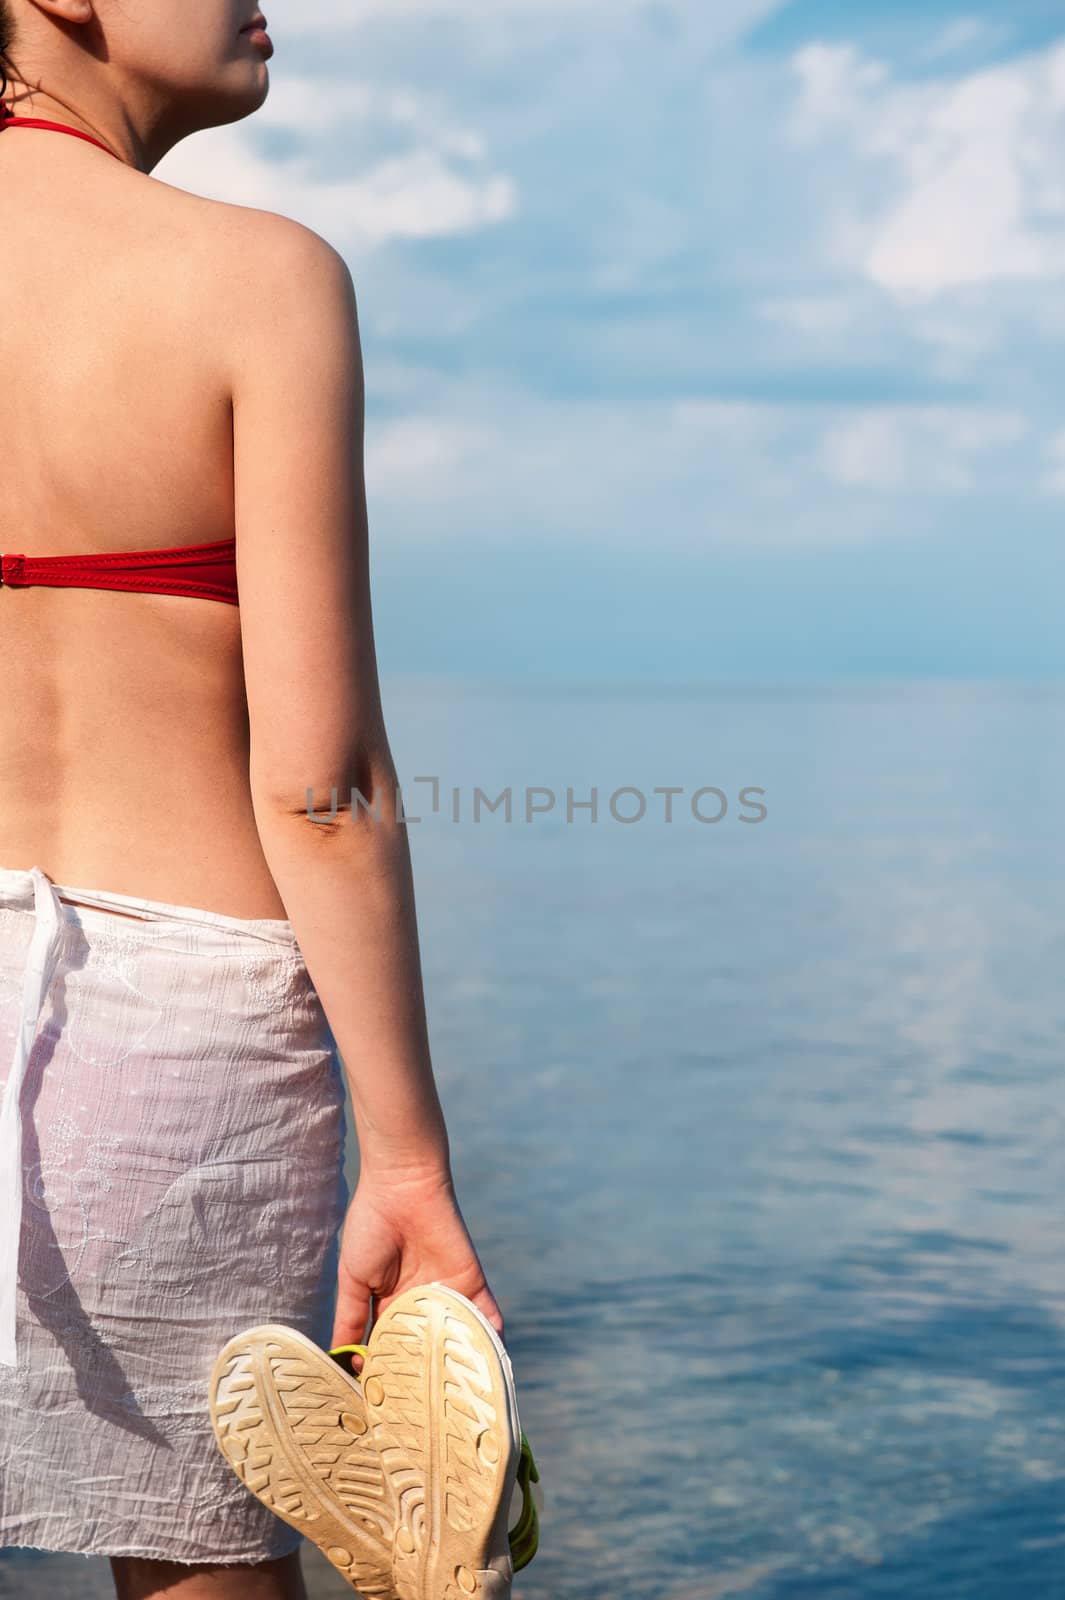 The girl in a bathing suit against the sea by galdzer